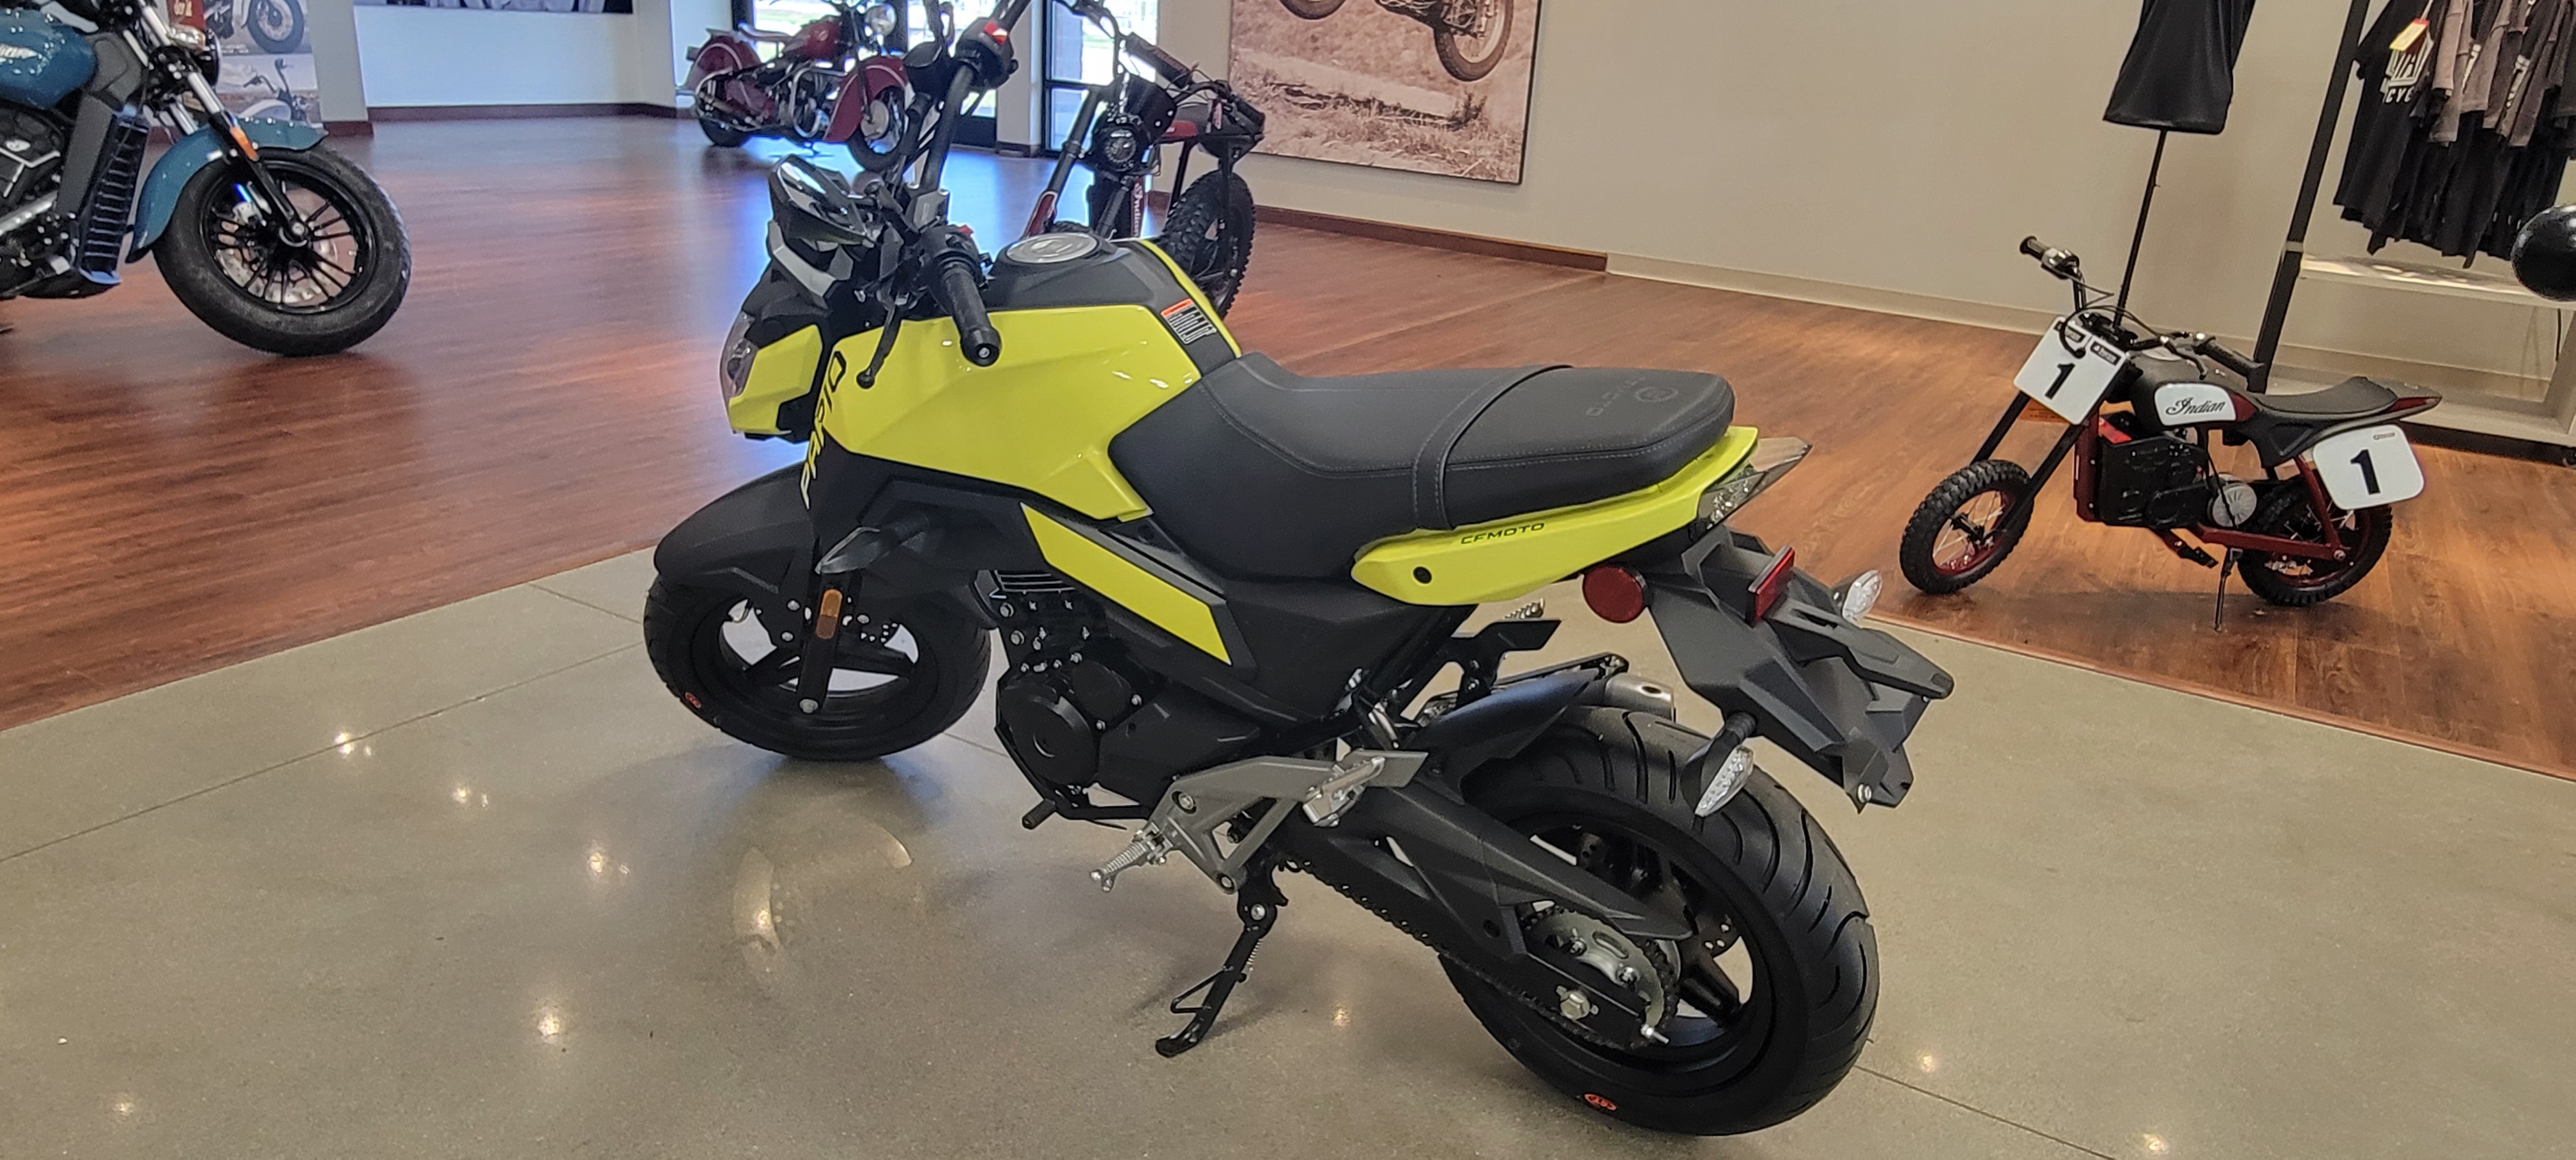 2022 CFMOTO Papio Base at Brenny's Motorcycle Clinic, Bettendorf, IA 52722